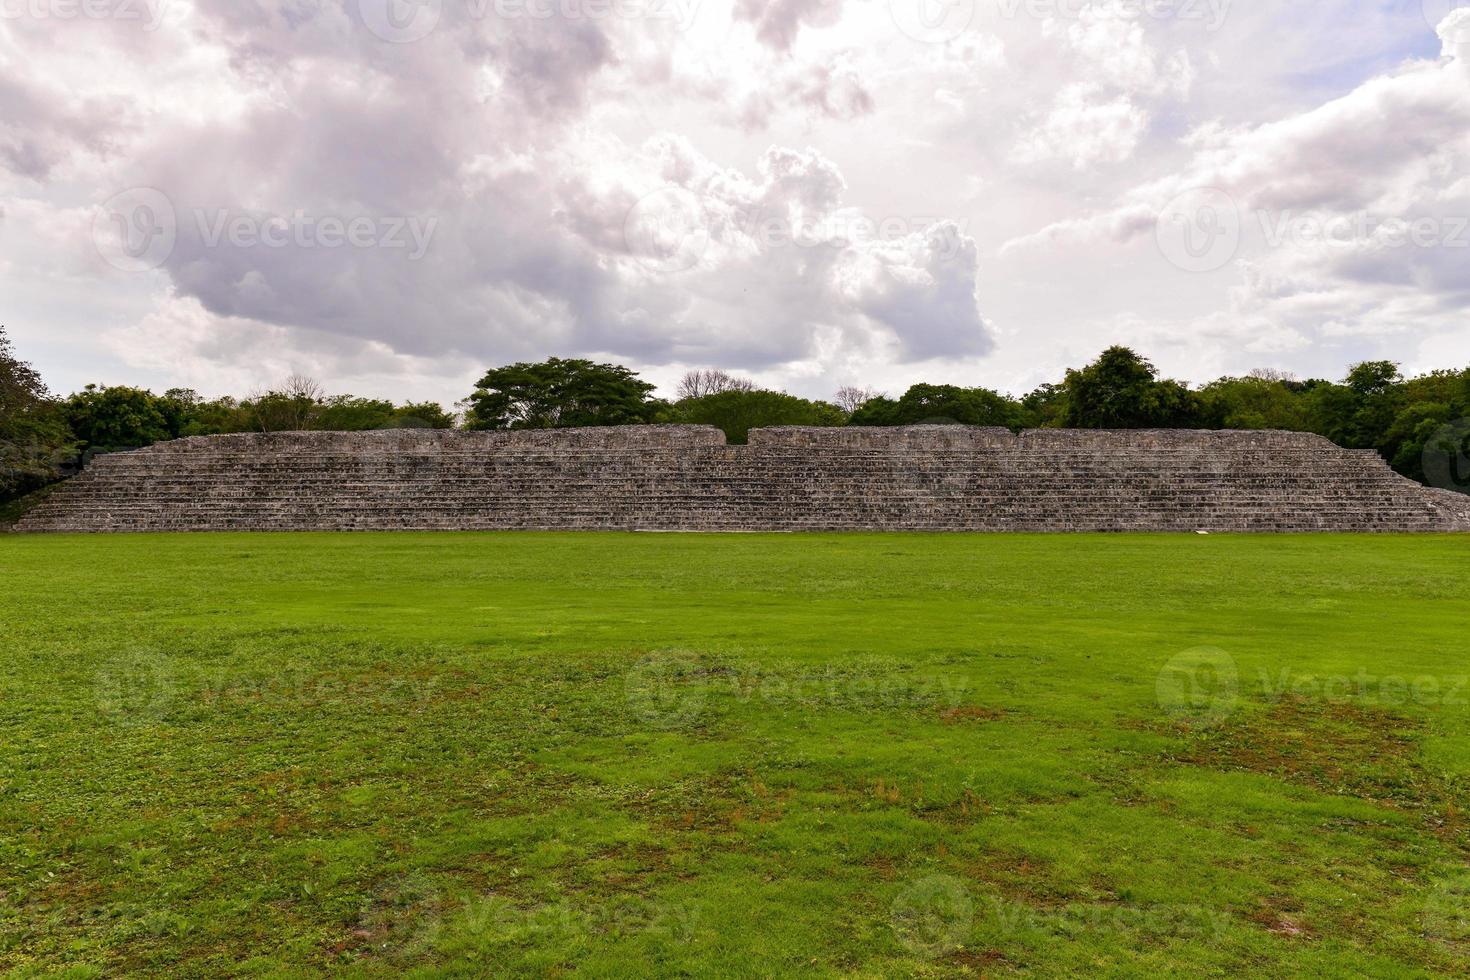 Edzna is a Maya archaeological site in the north of the Mexican state of Campeche. photo